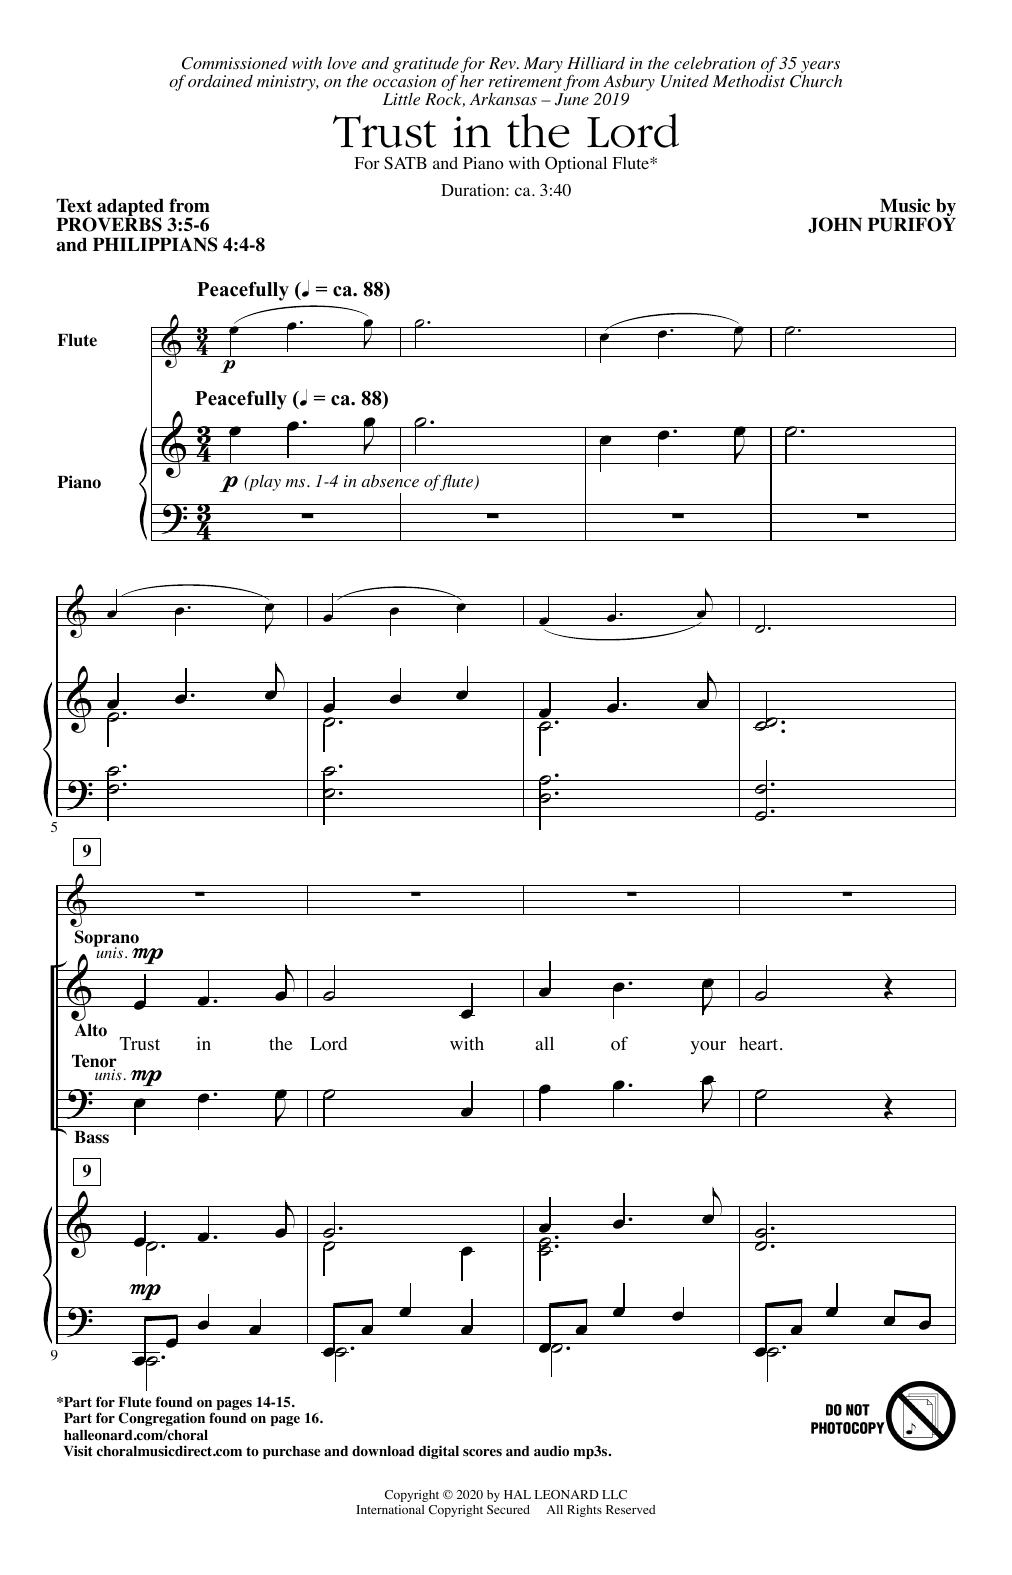 Download John Purifoy Trust In The Lord Sheet Music